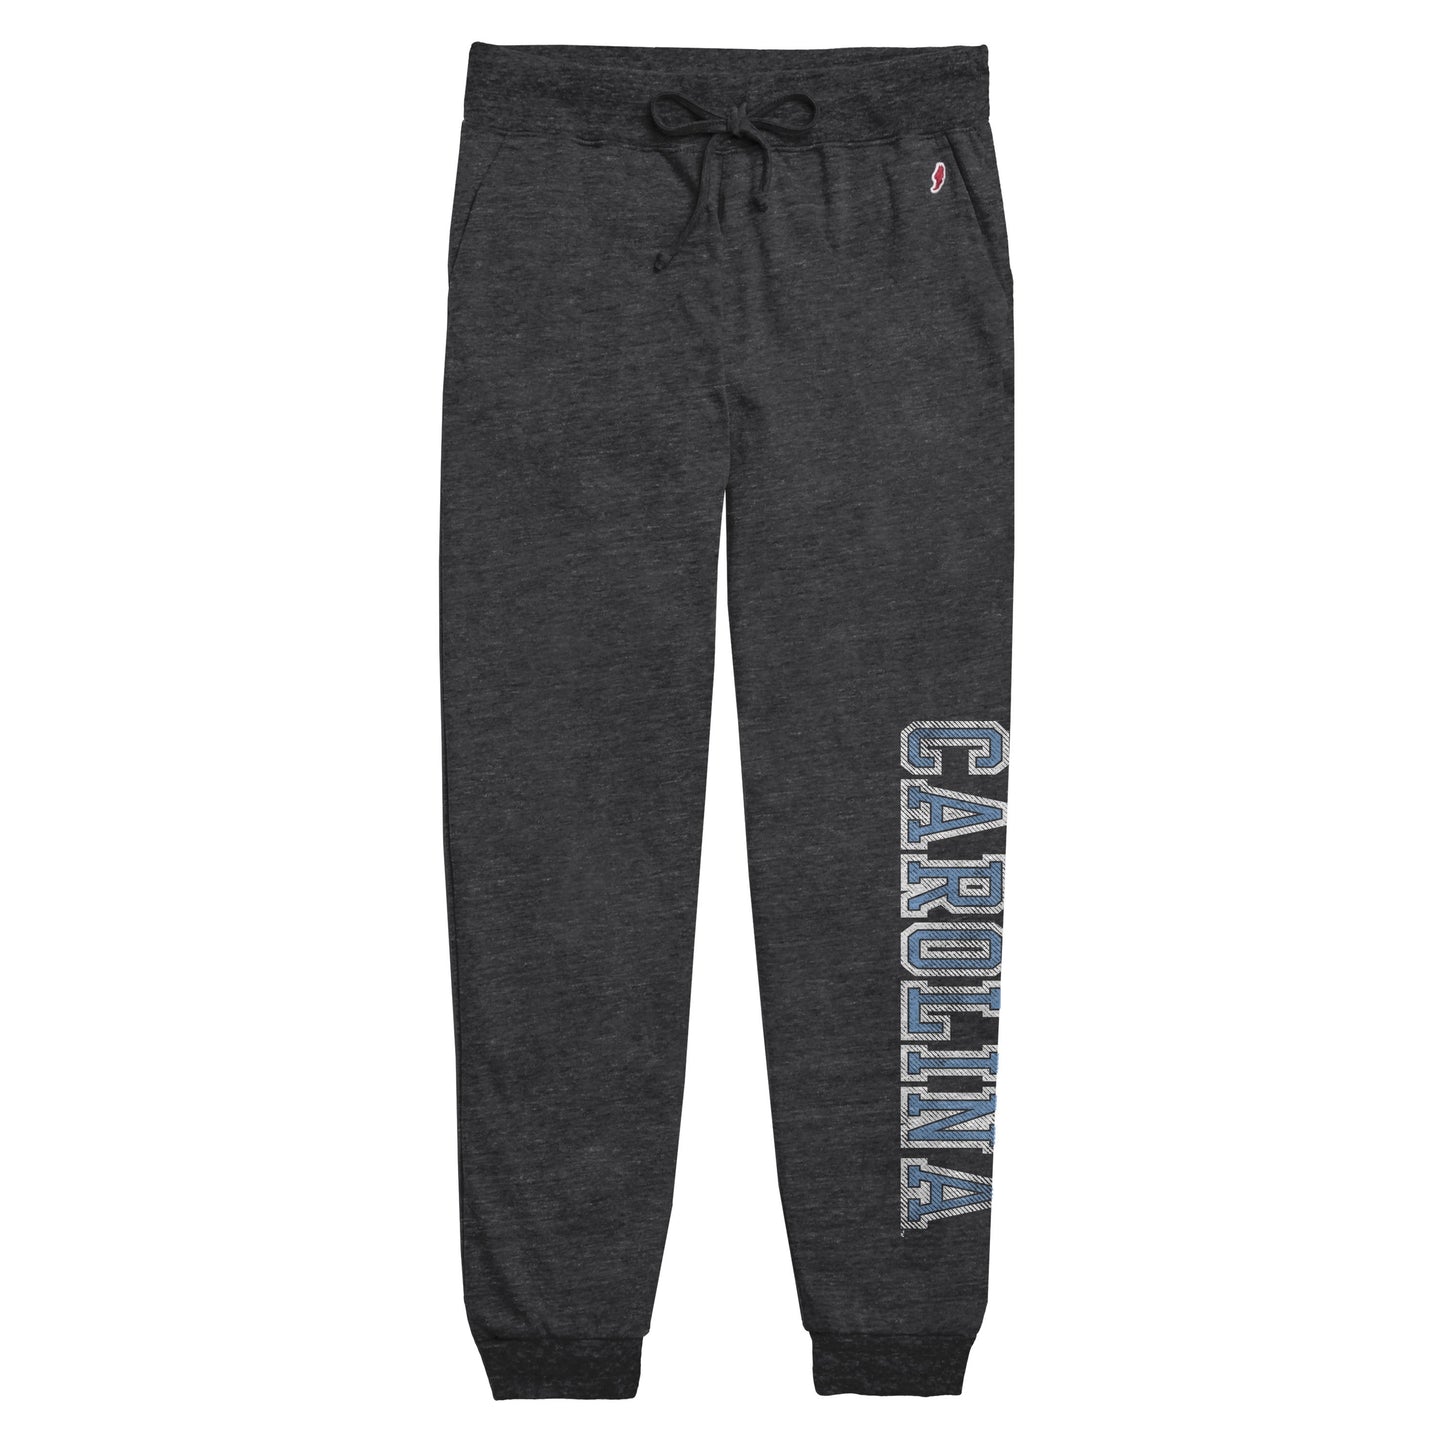 UNC Women’s Joggers in Comfort Thin Material Heathered Black